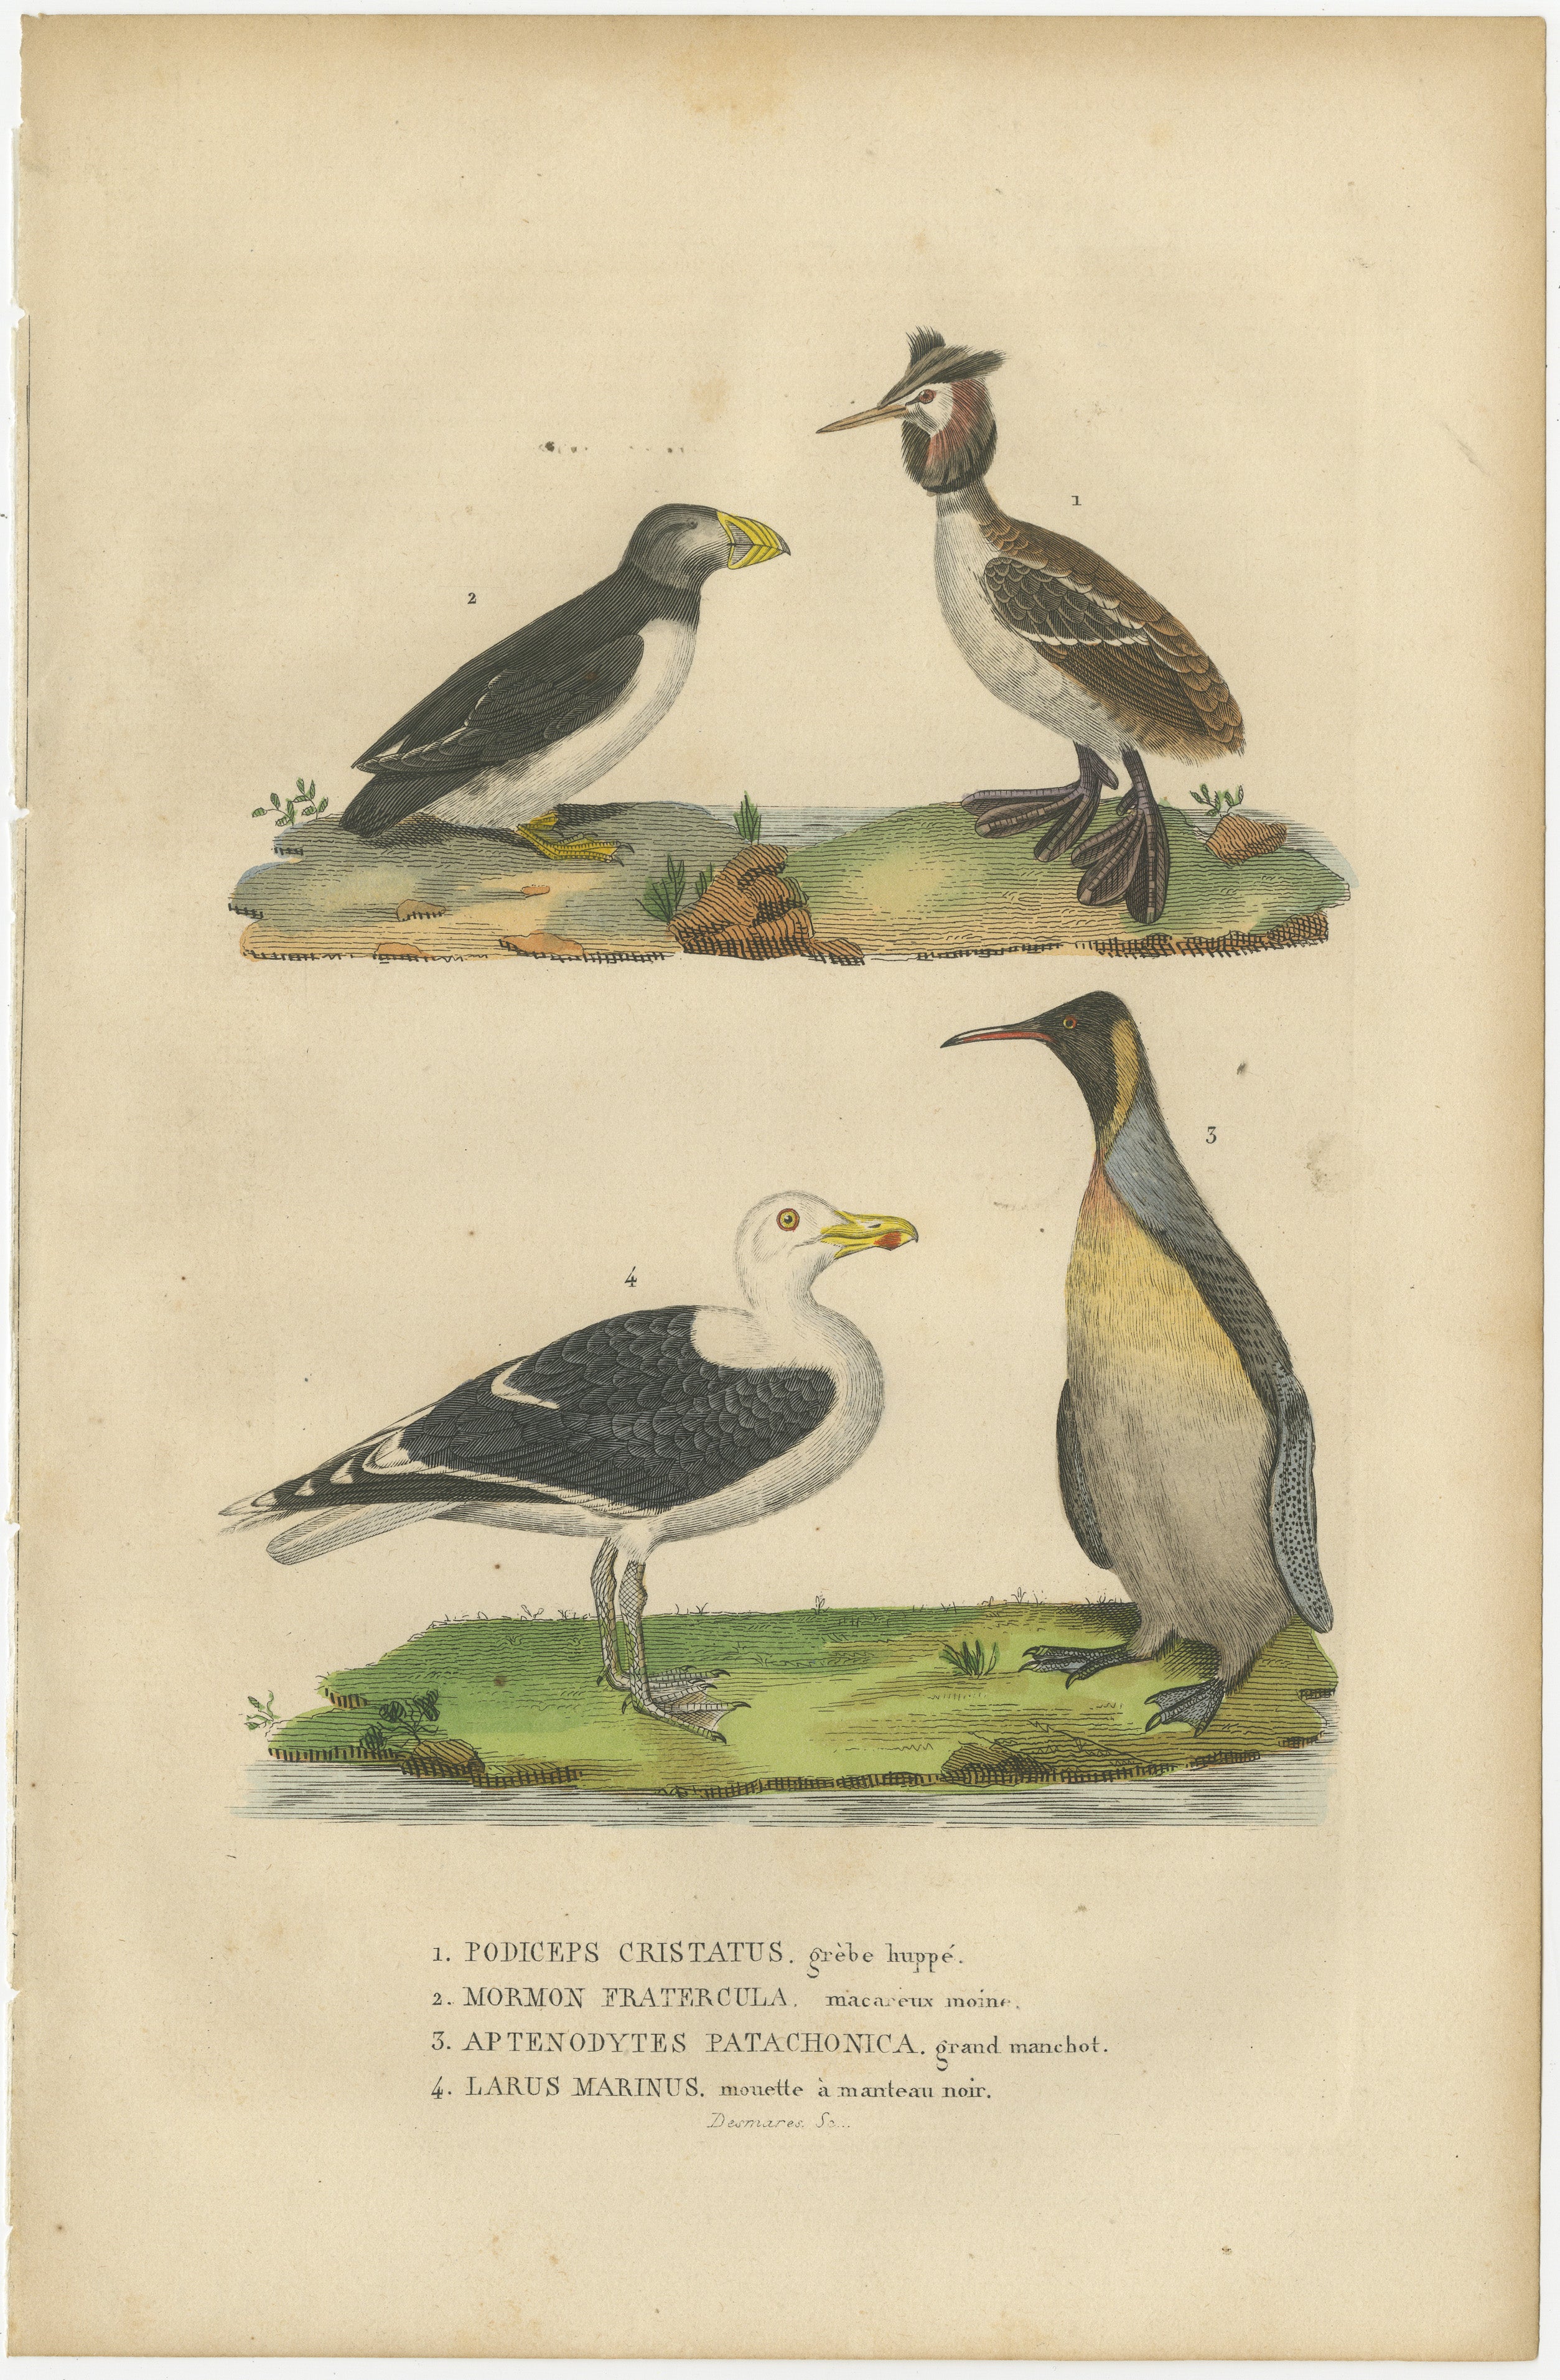 Title: ‘1. PODICEPS CRISTATUS – GREBE HUPPE, 2. MORMON FRATERCULA – MACAREUX MOINE, 3. APTENODYTES PATACHONICA – GRAND MANCHOT, 4. LARUS MARINUS – MOUETTE A MANTEAU NOIR.’
1. Great Crested Grebe, 2. Atlantic Puffin, nicknames such as “clown of the